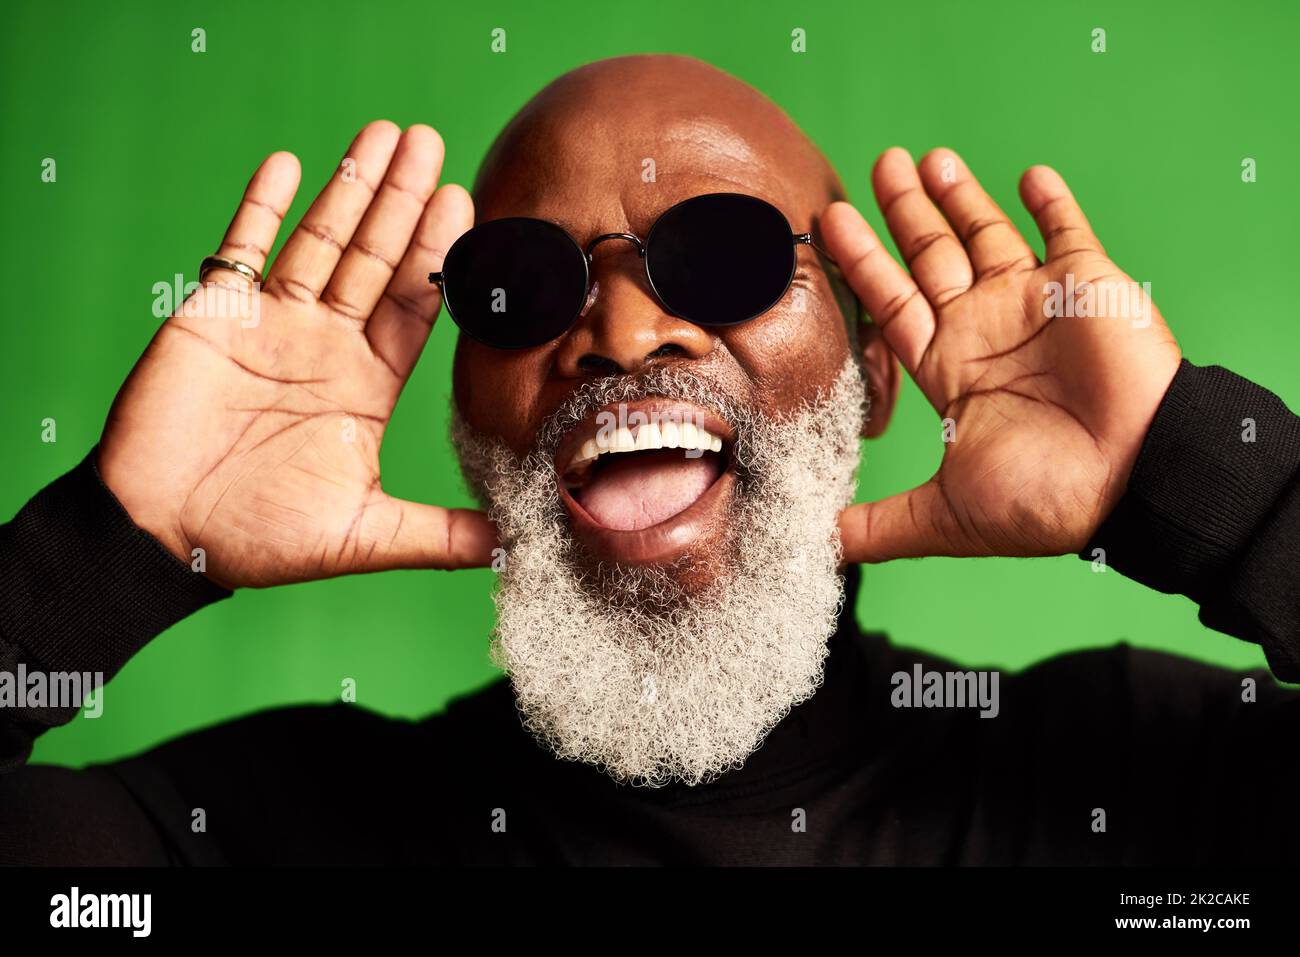 Growing old doesnt mean you have to be boring. Studio shot of a senior man wearing glasses and making funny faces against a green background. Stock Photo